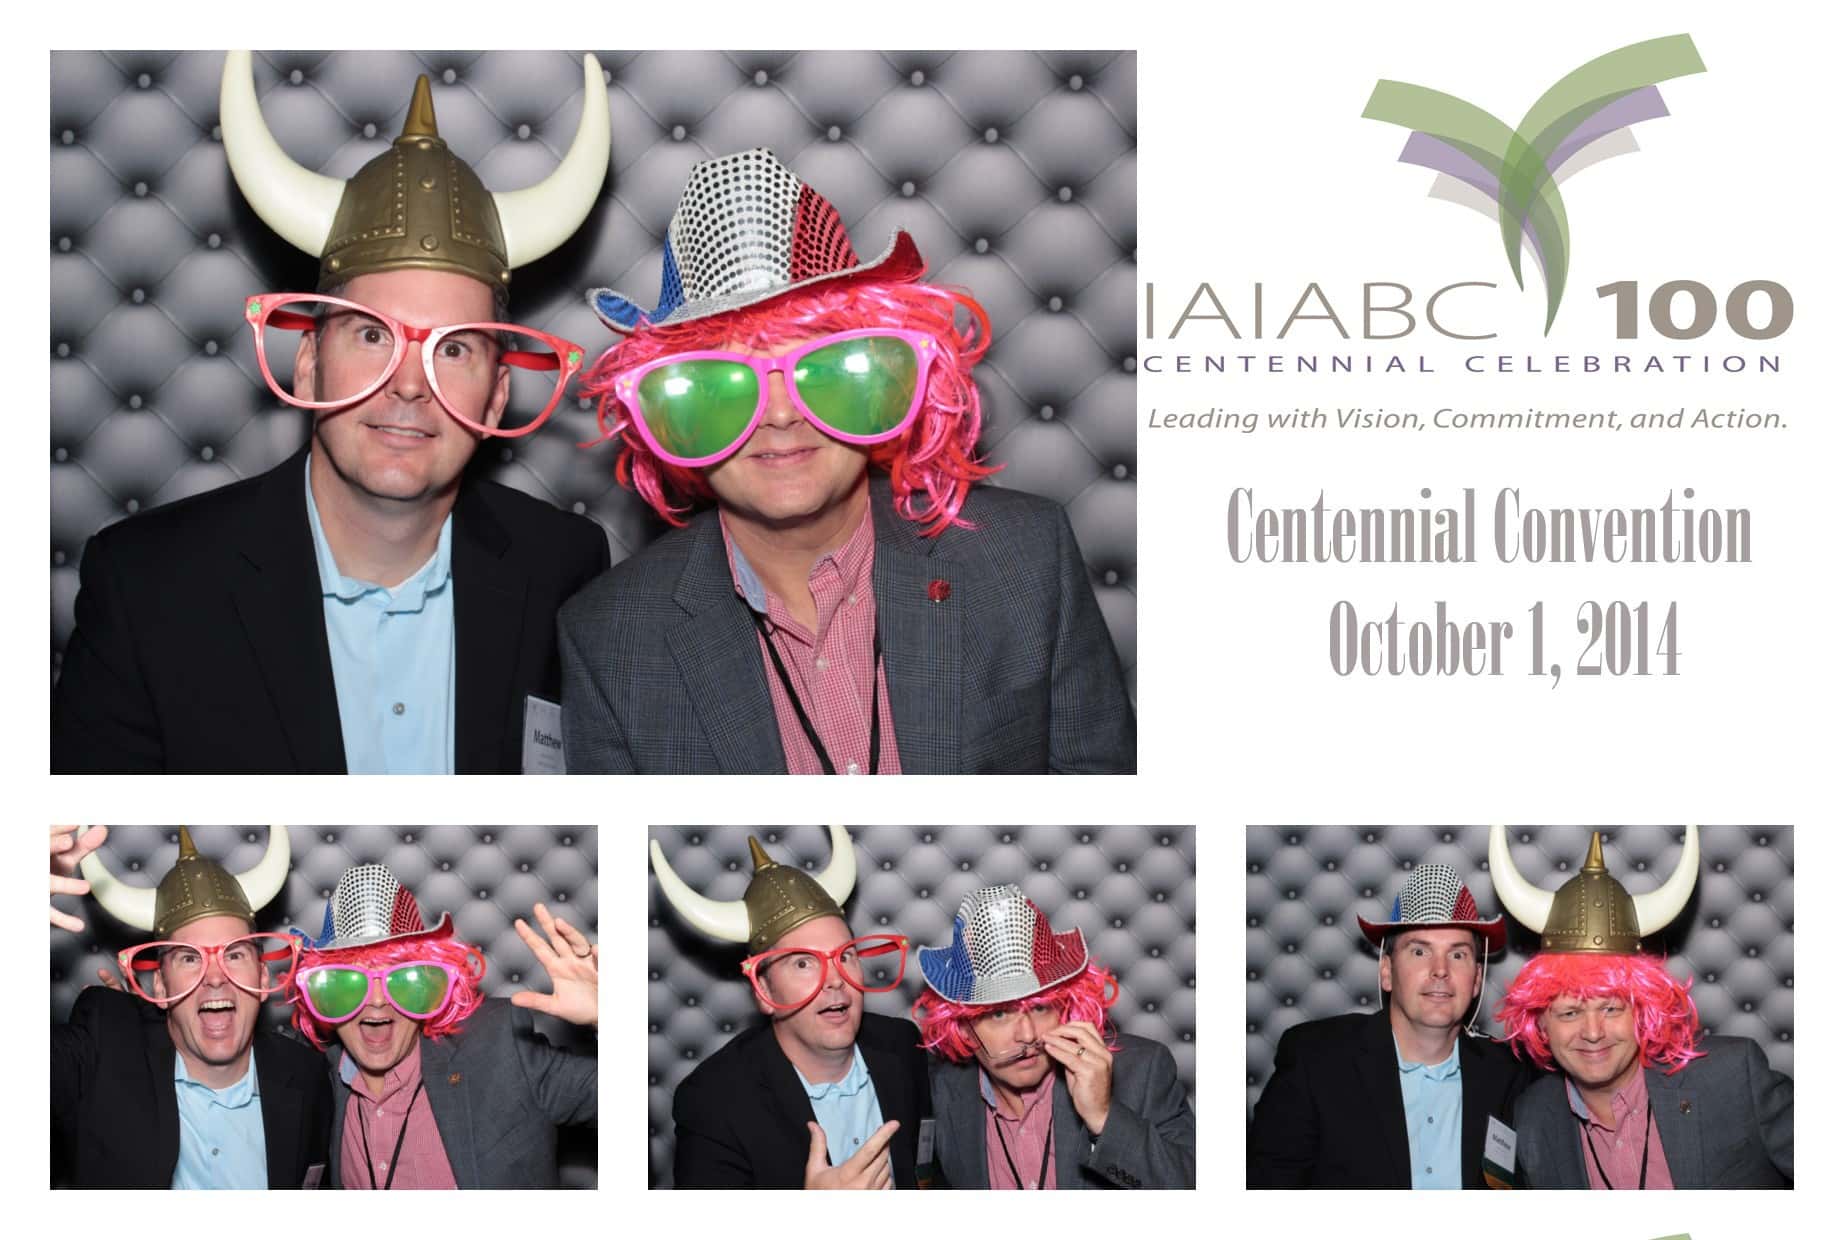 Photo-Booth-Rental-Austin-Corporate-Social-Media-Conference-Training-Meetings-No. 1-Affordable-No.1